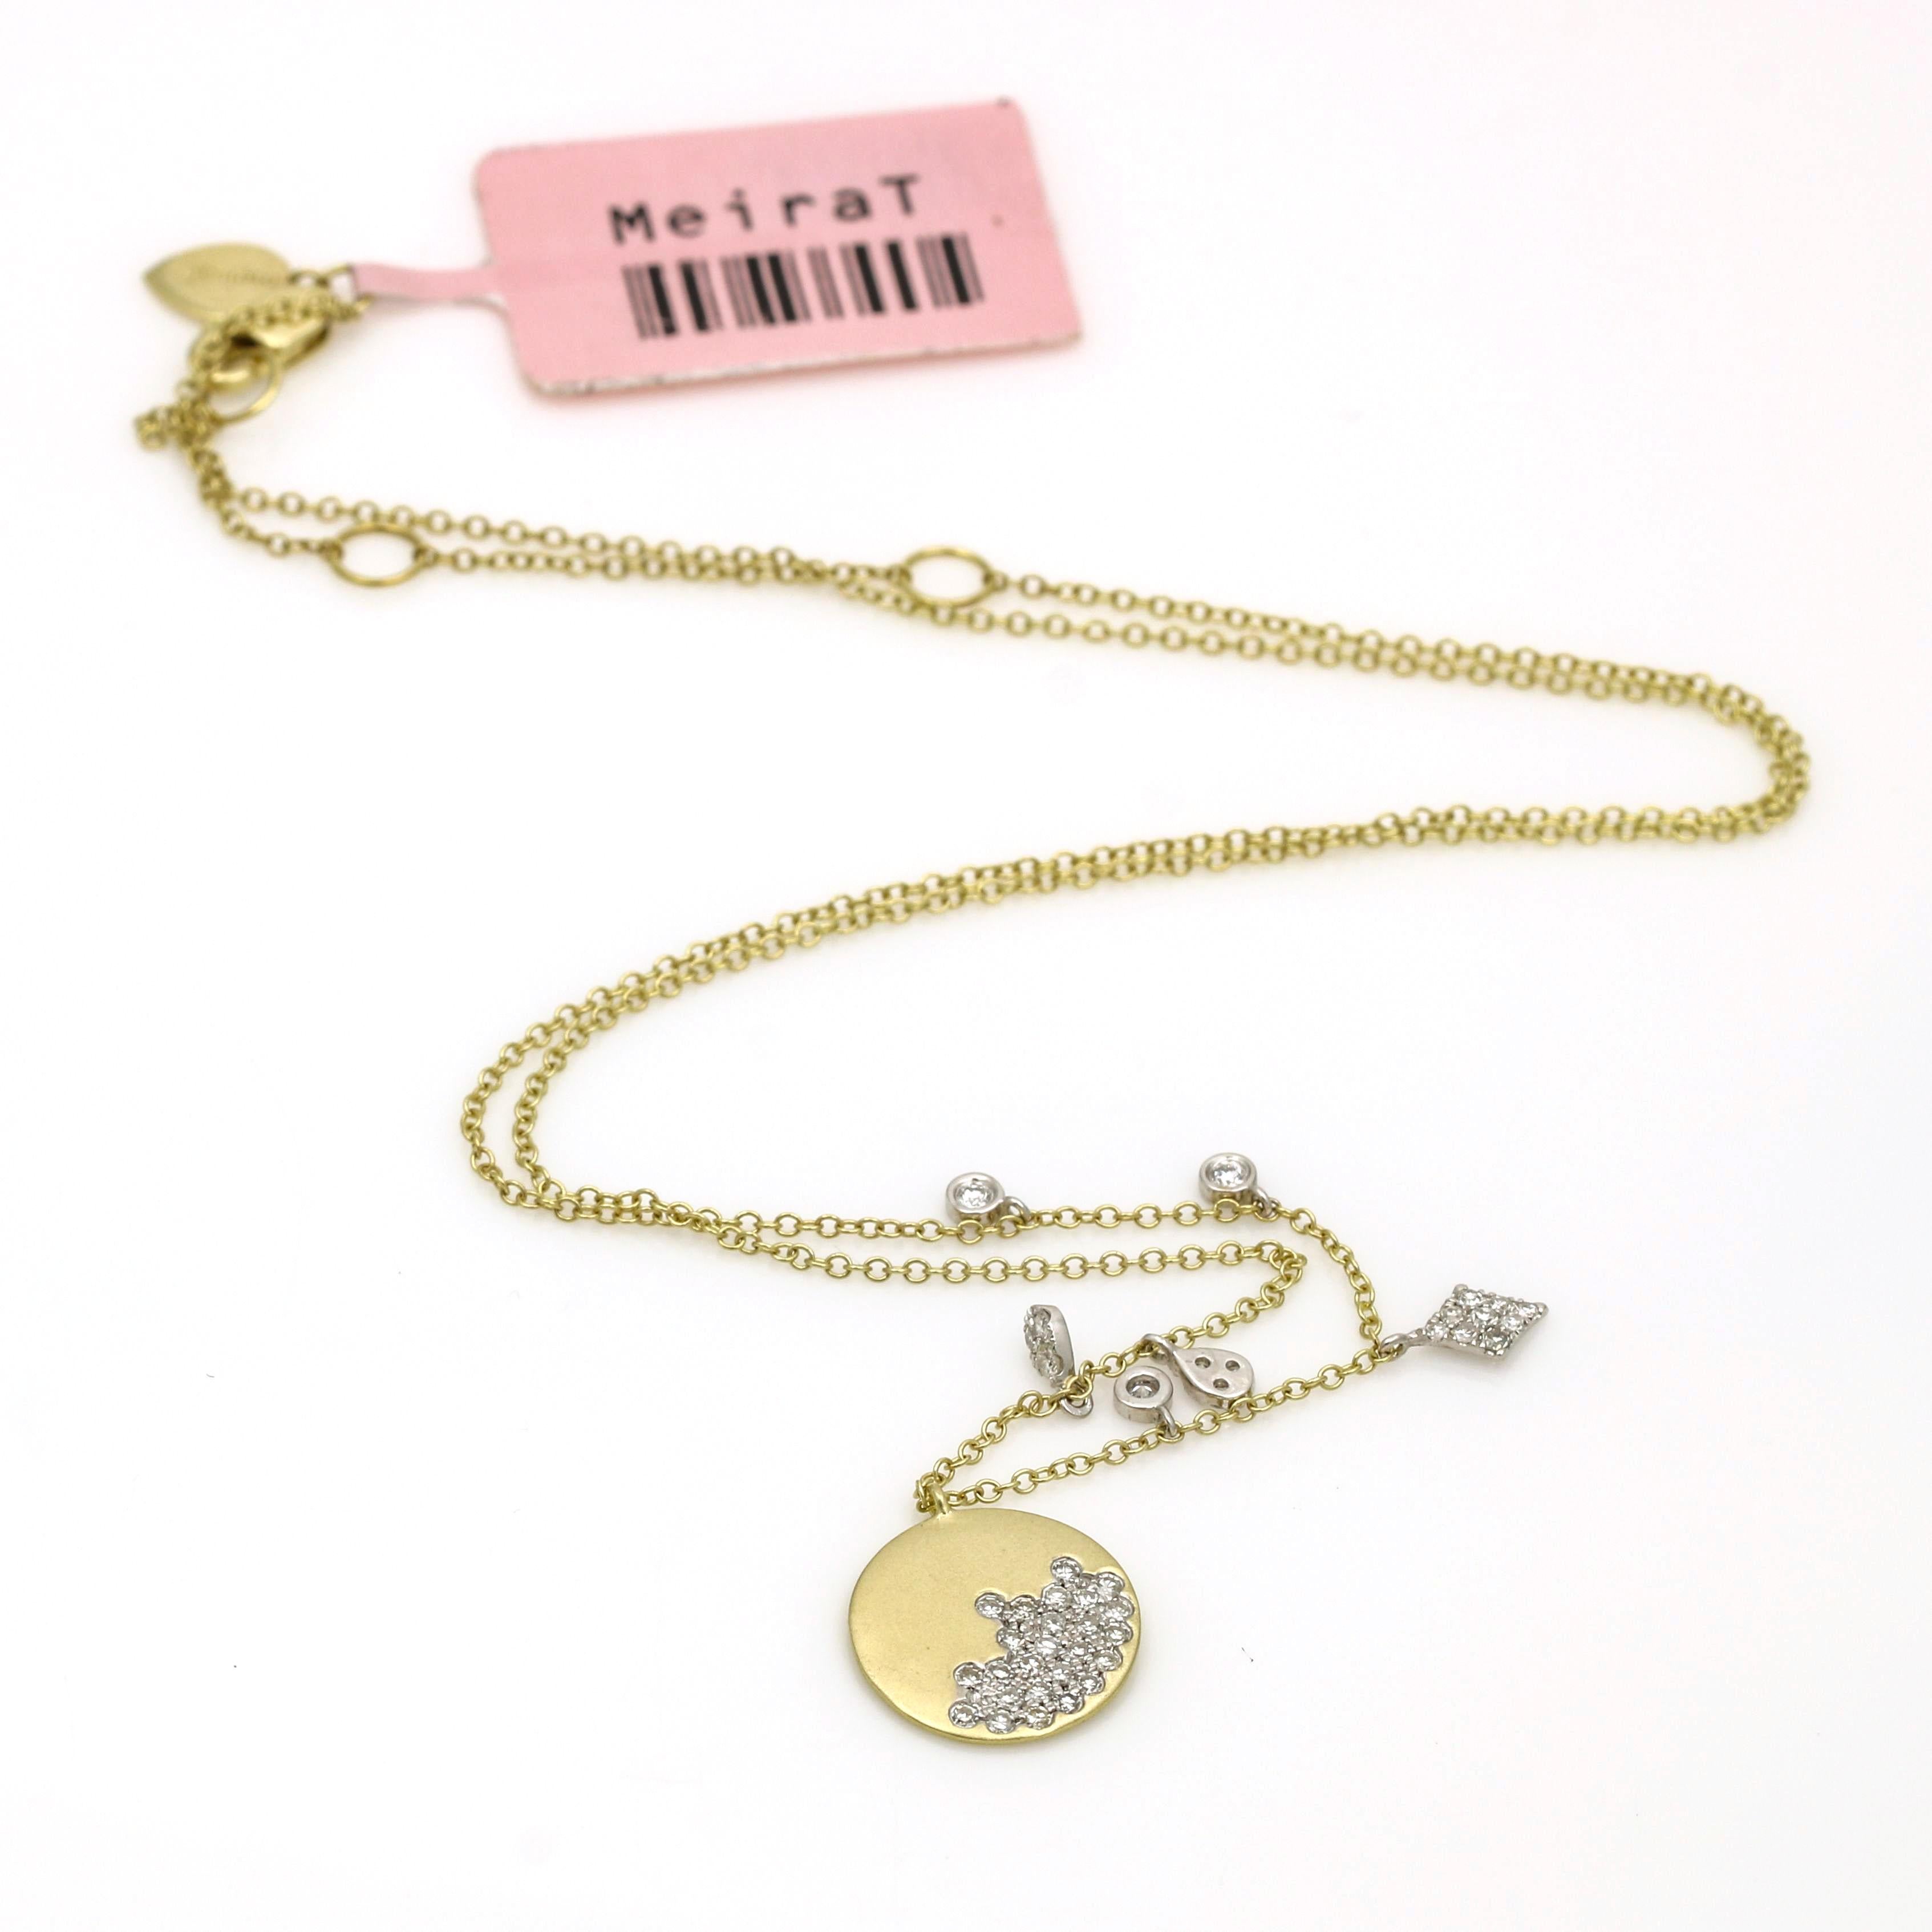 Contemporary Meira T Brushed 14k Gold and Diamonds Necklace with Dangling Charms For Sale